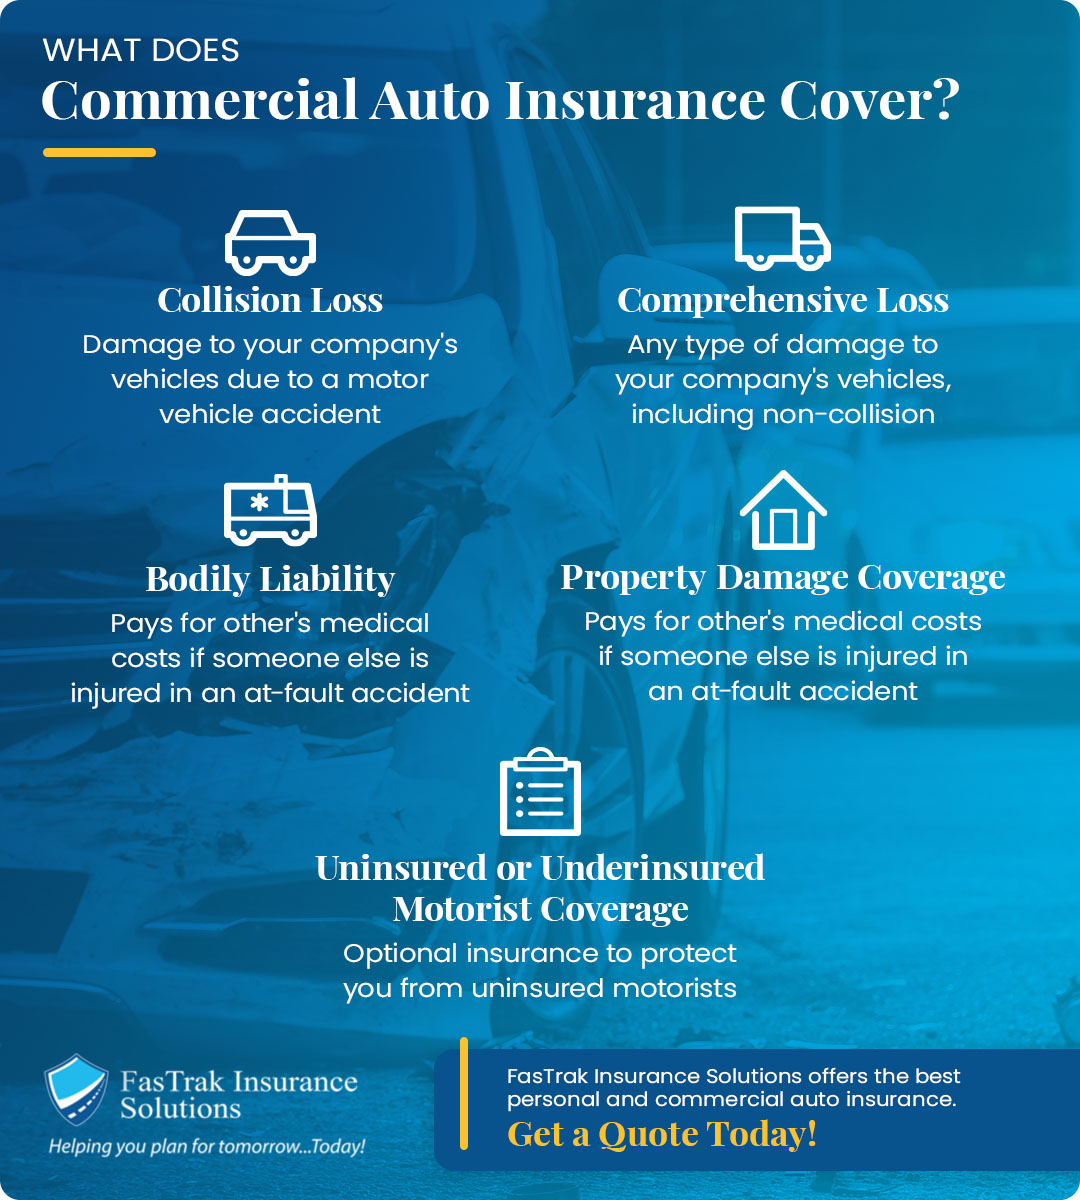 what does commercial auto insurance cover?